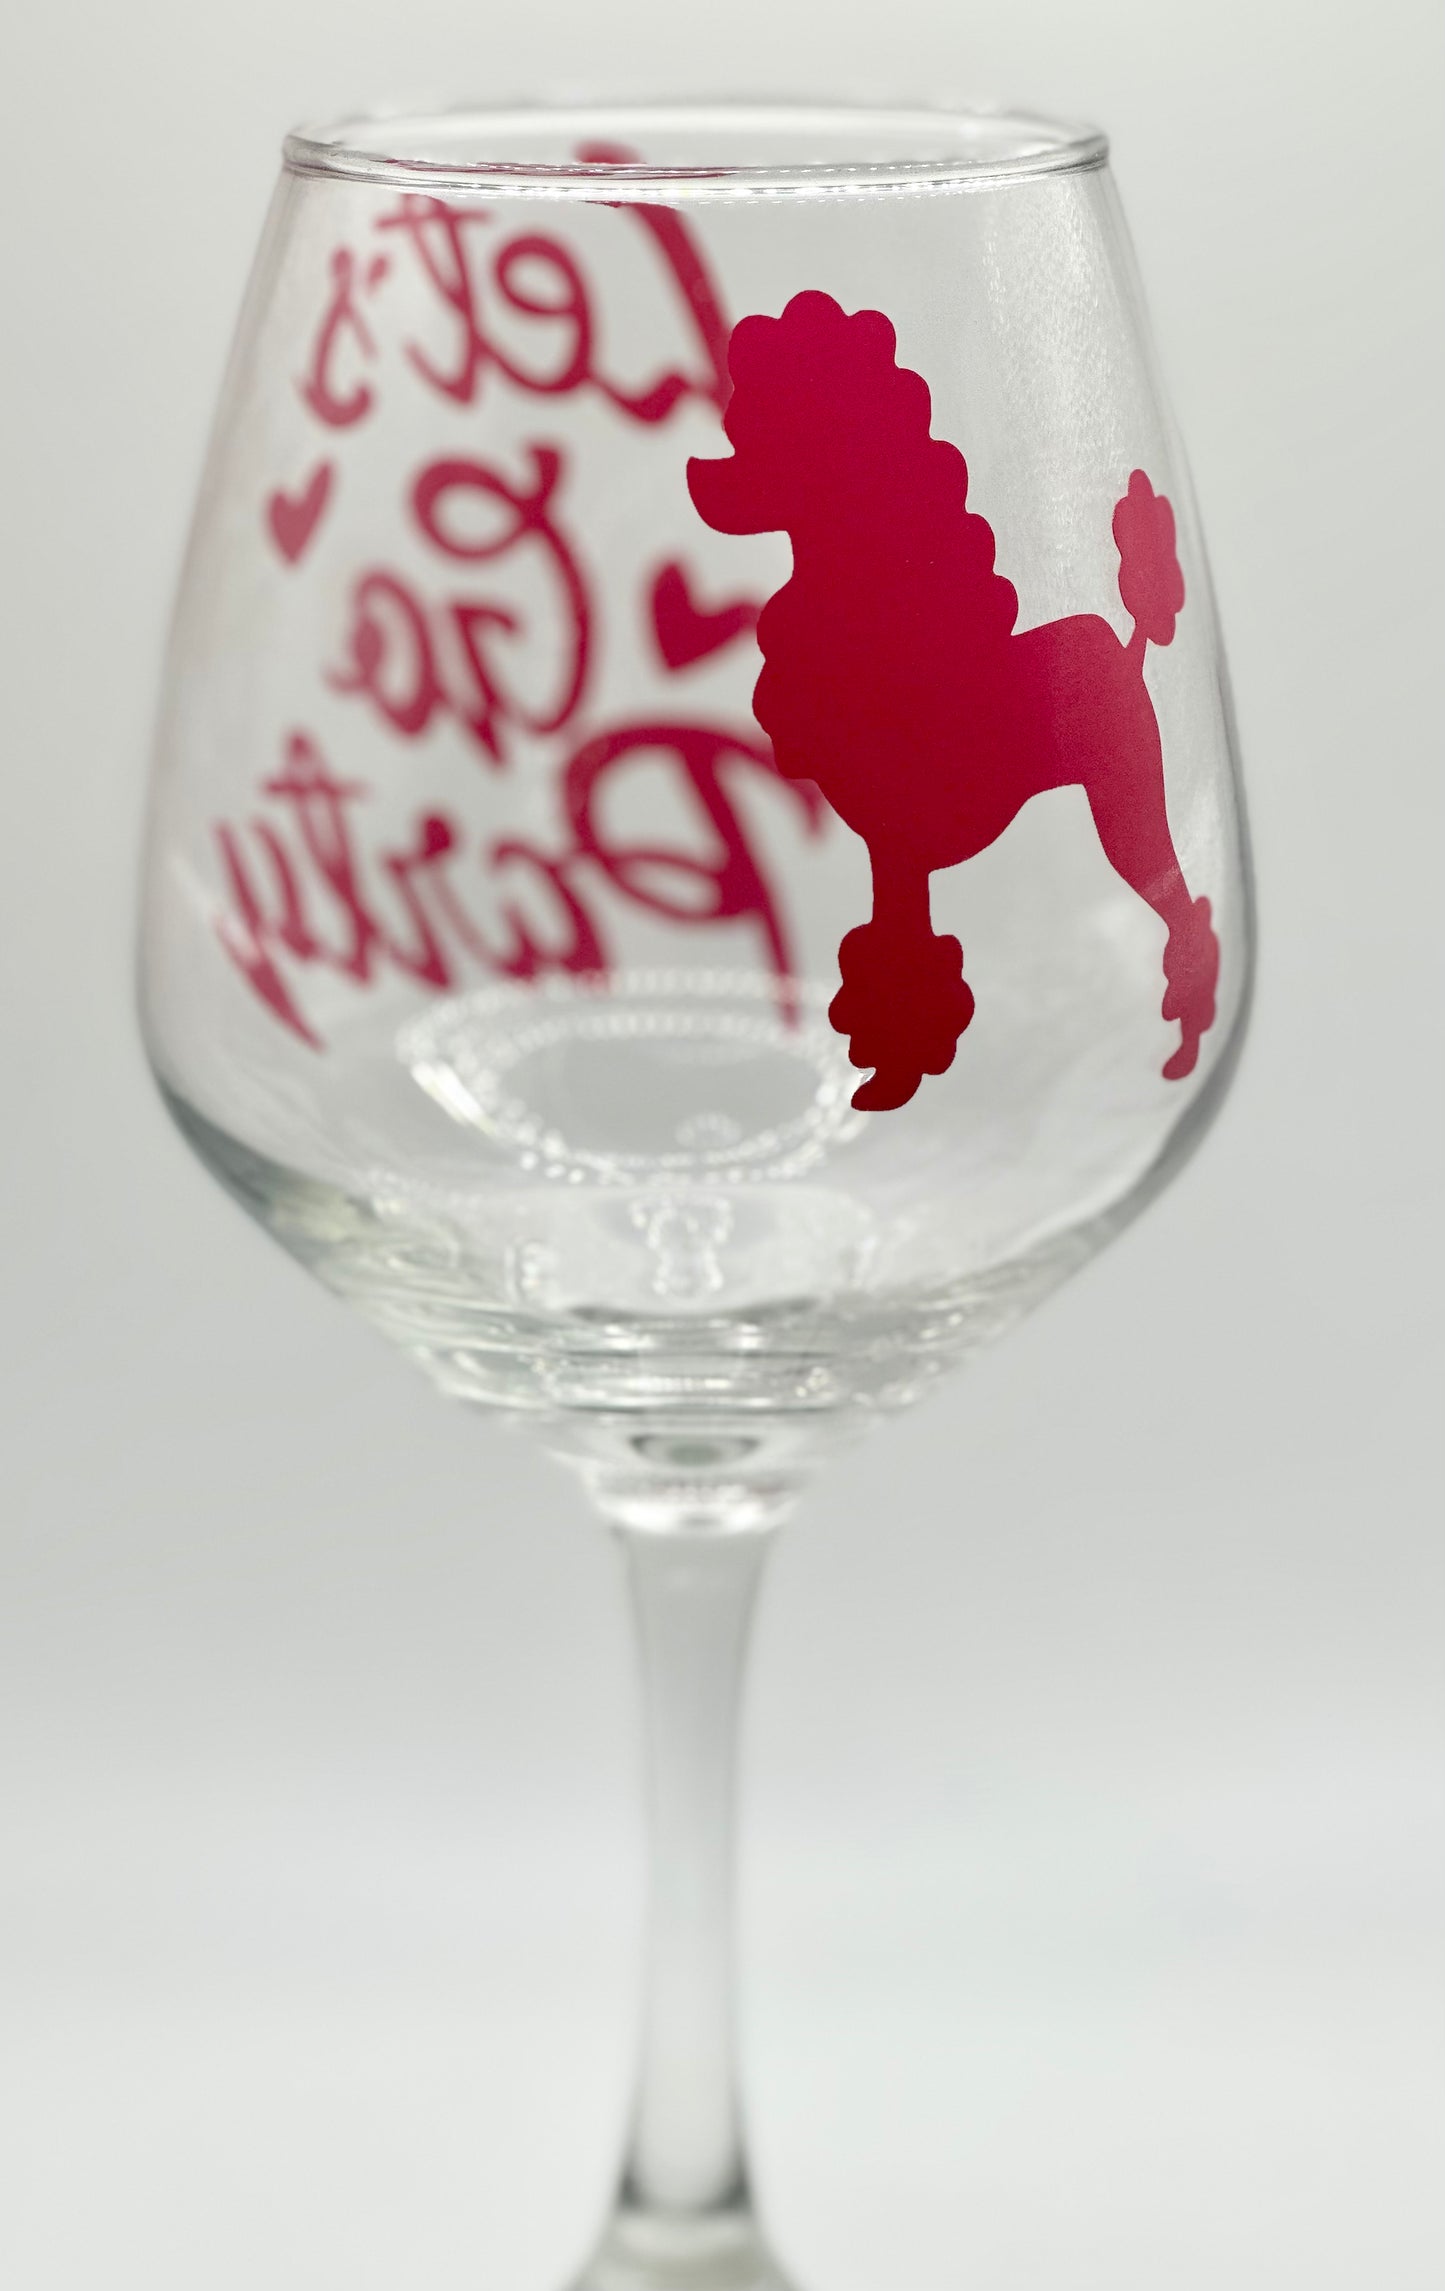 Let’s Go Party Wine Glass